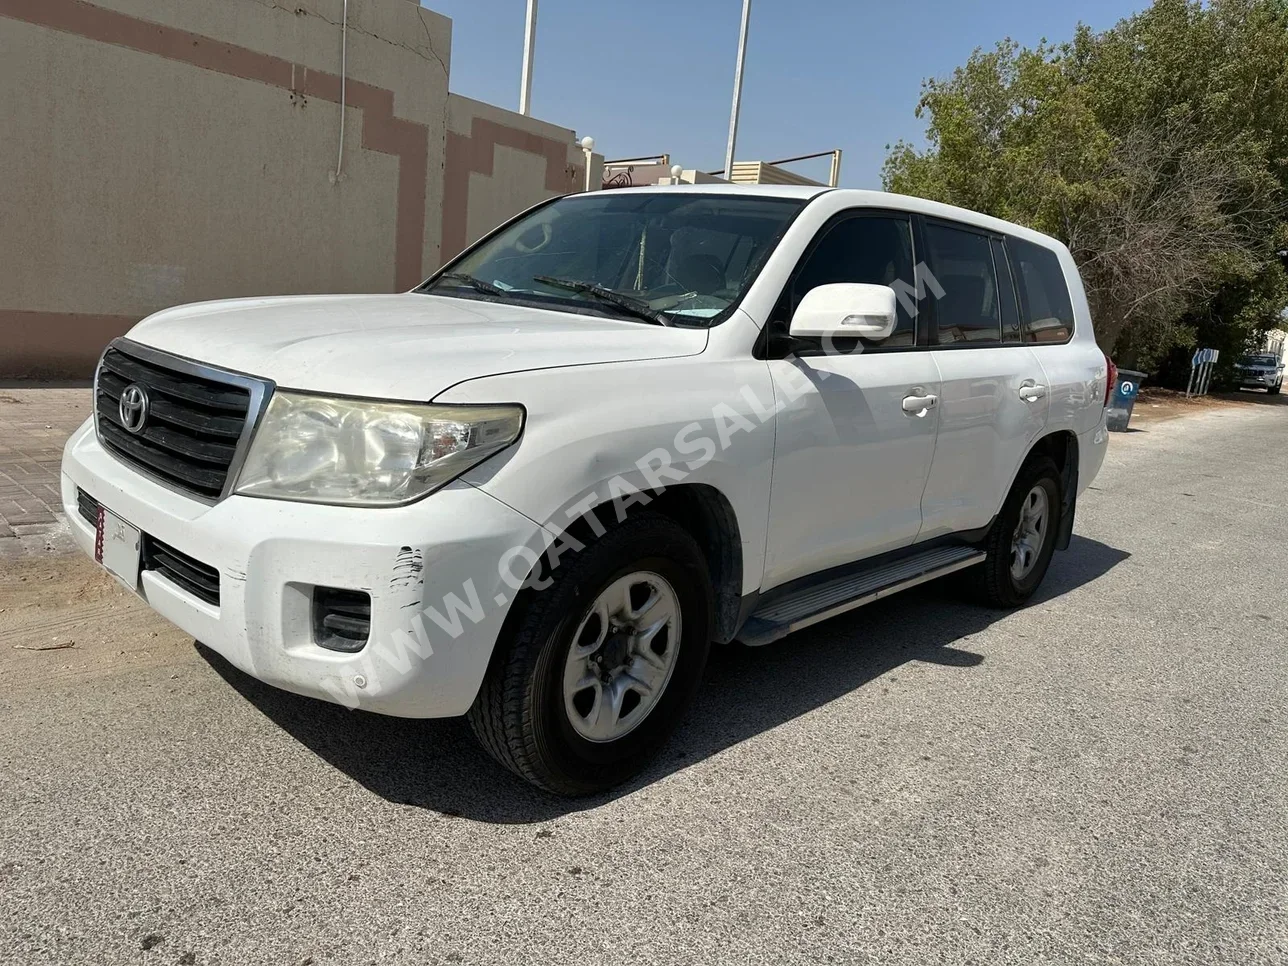 Toyota  Land Cruiser  G  2015  Automatic  398,000 Km  6 Cylinder  Four Wheel Drive (4WD)  SUV  White